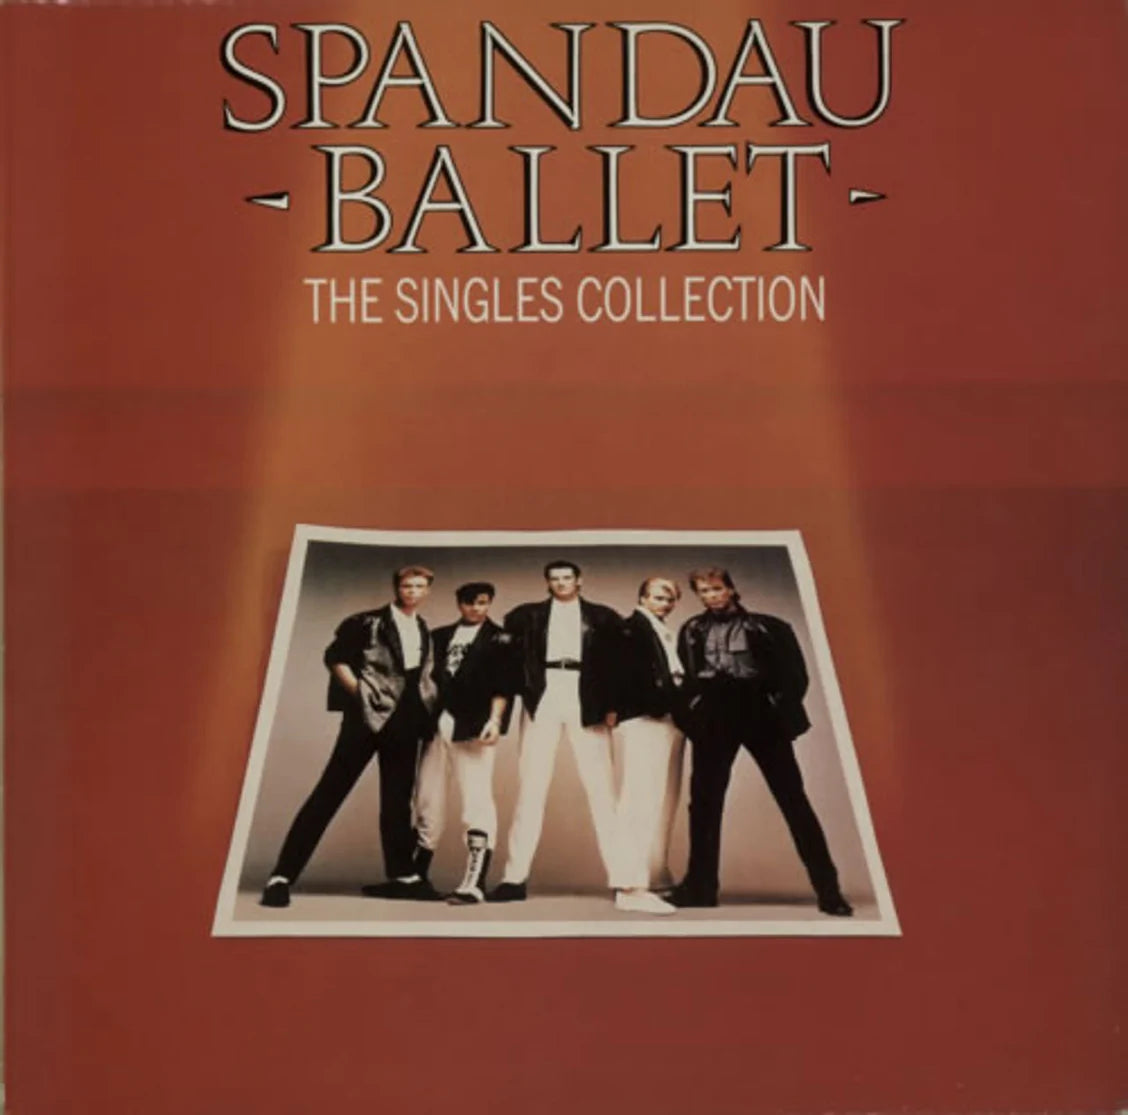 Spandau Ballet - The Singles Collection: CD (Pre-loved & Refurbed)